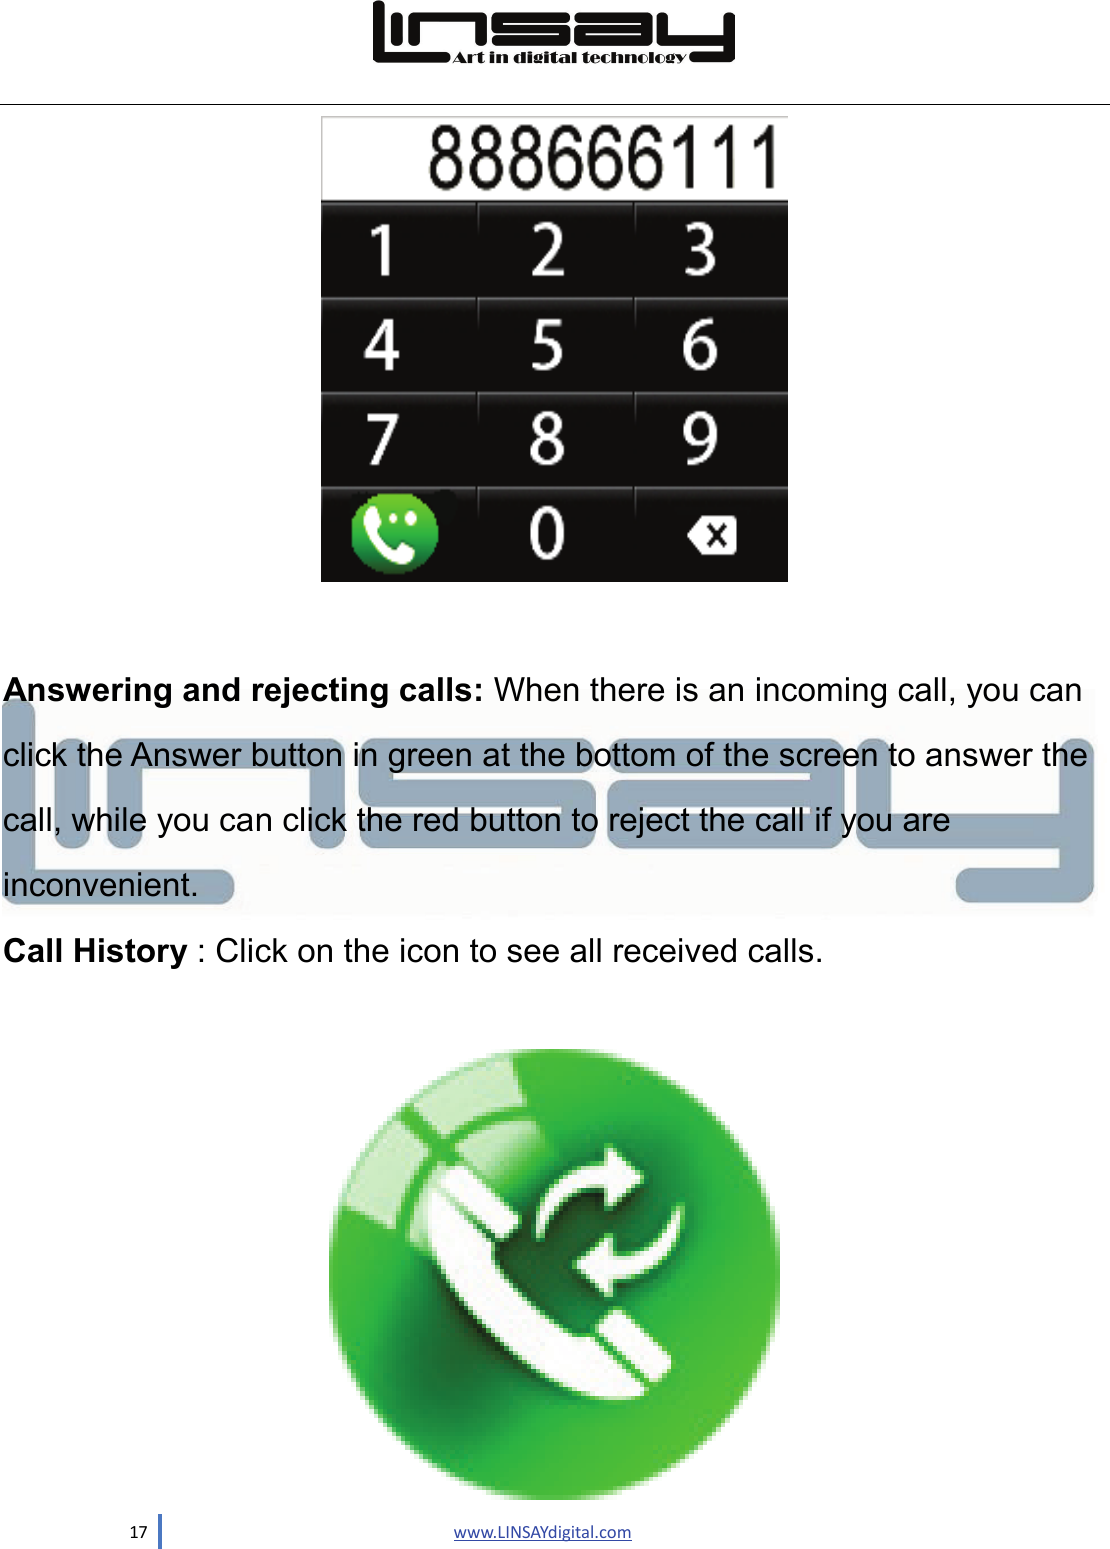  17                               www.LINSAYdigital.com    Answering and rejecting calls: When there is an incoming call, you can click the Answer button in green at the bottom of the screen to answer the call, while you can click the red button to reject the call if you are inconvenient. Call History : Click on the icon to see all received calls.   